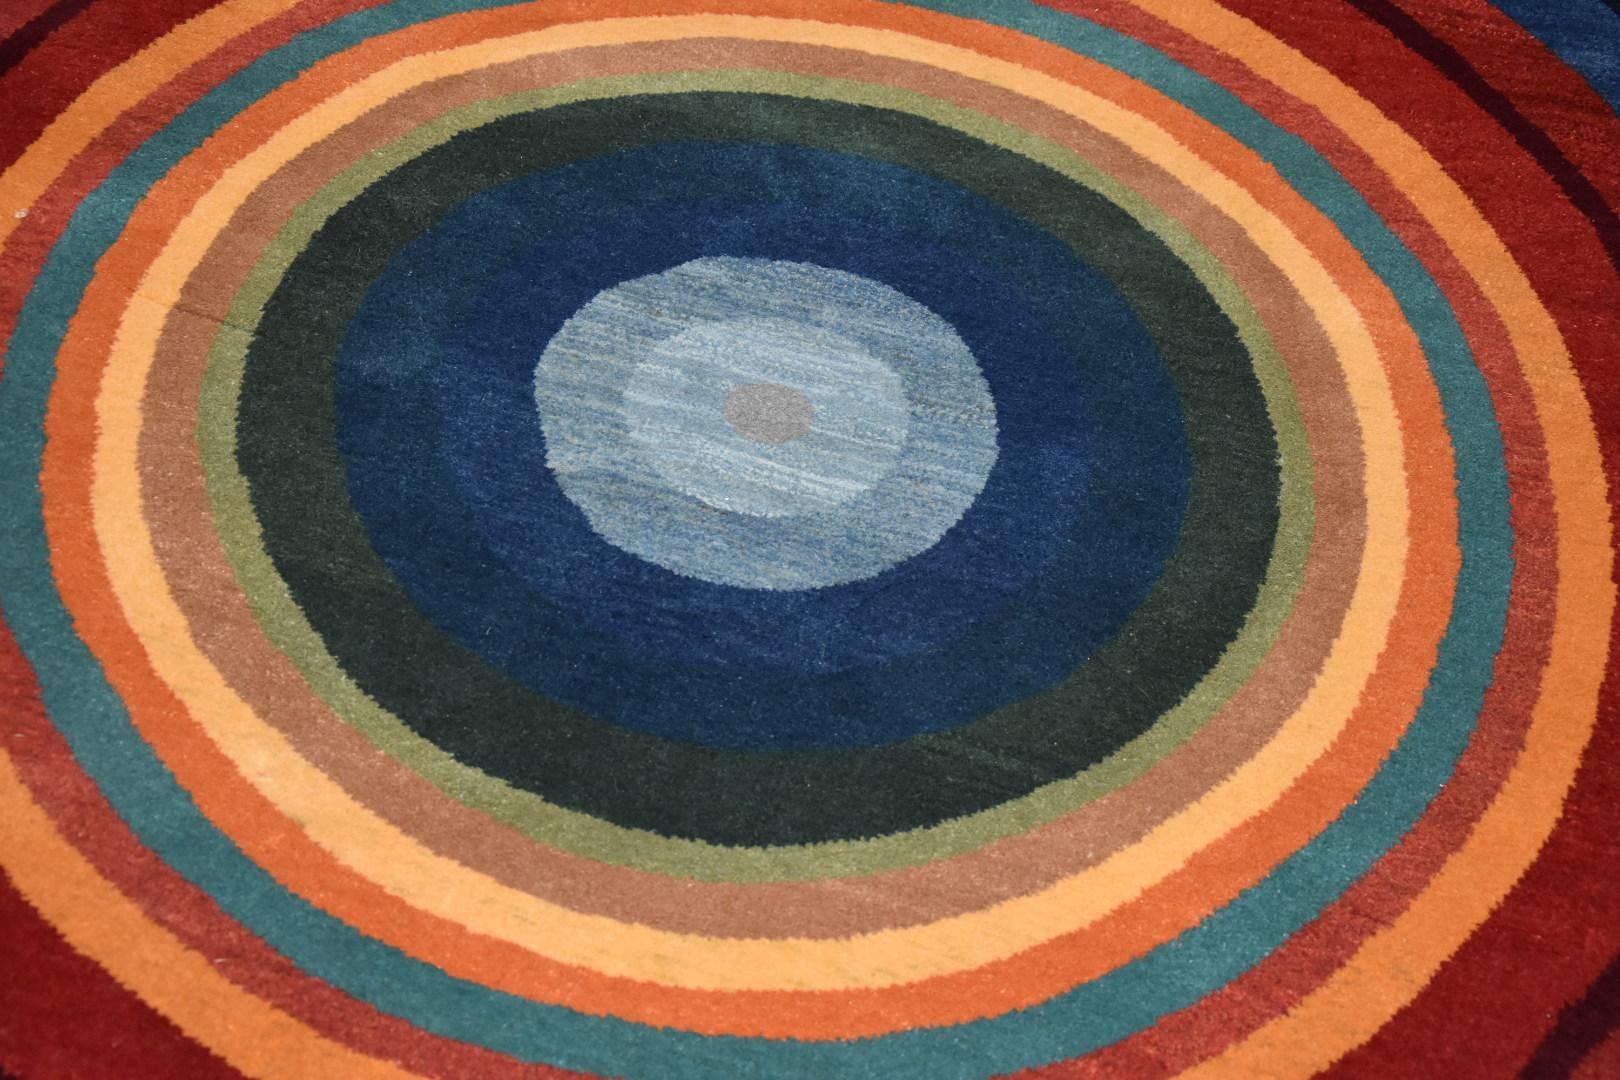 Beautiful round Persian rug with multiple colors such as blues, yellows, oranges, greens... It is very original and hand-crafted by the franco-iranien artist Pierre Kiandjan. With its circular shapes, it reminds us of the famous Delaunay's couple's